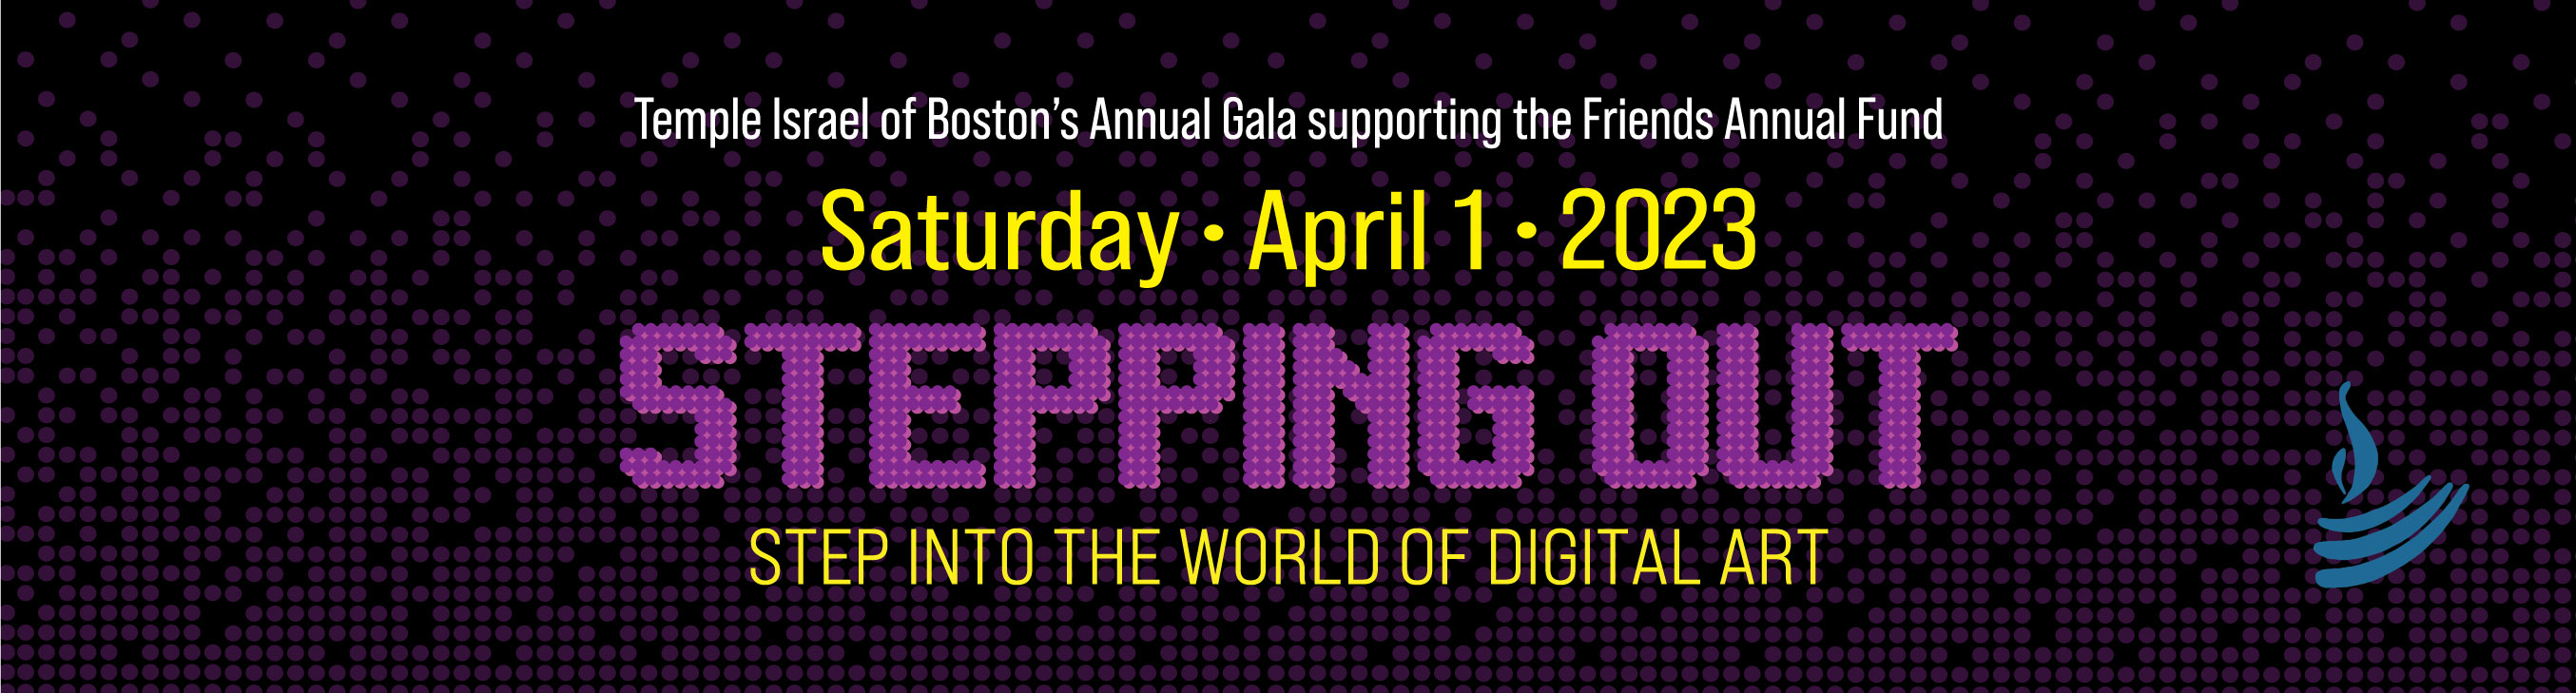 Banner in black, white, yellow, and purple with text: Temple Israel of Boston's Annual Gala supporting the Friends Annual Fund Saturday April 1 2023 Stepping Out--Step into the World of Digital Art